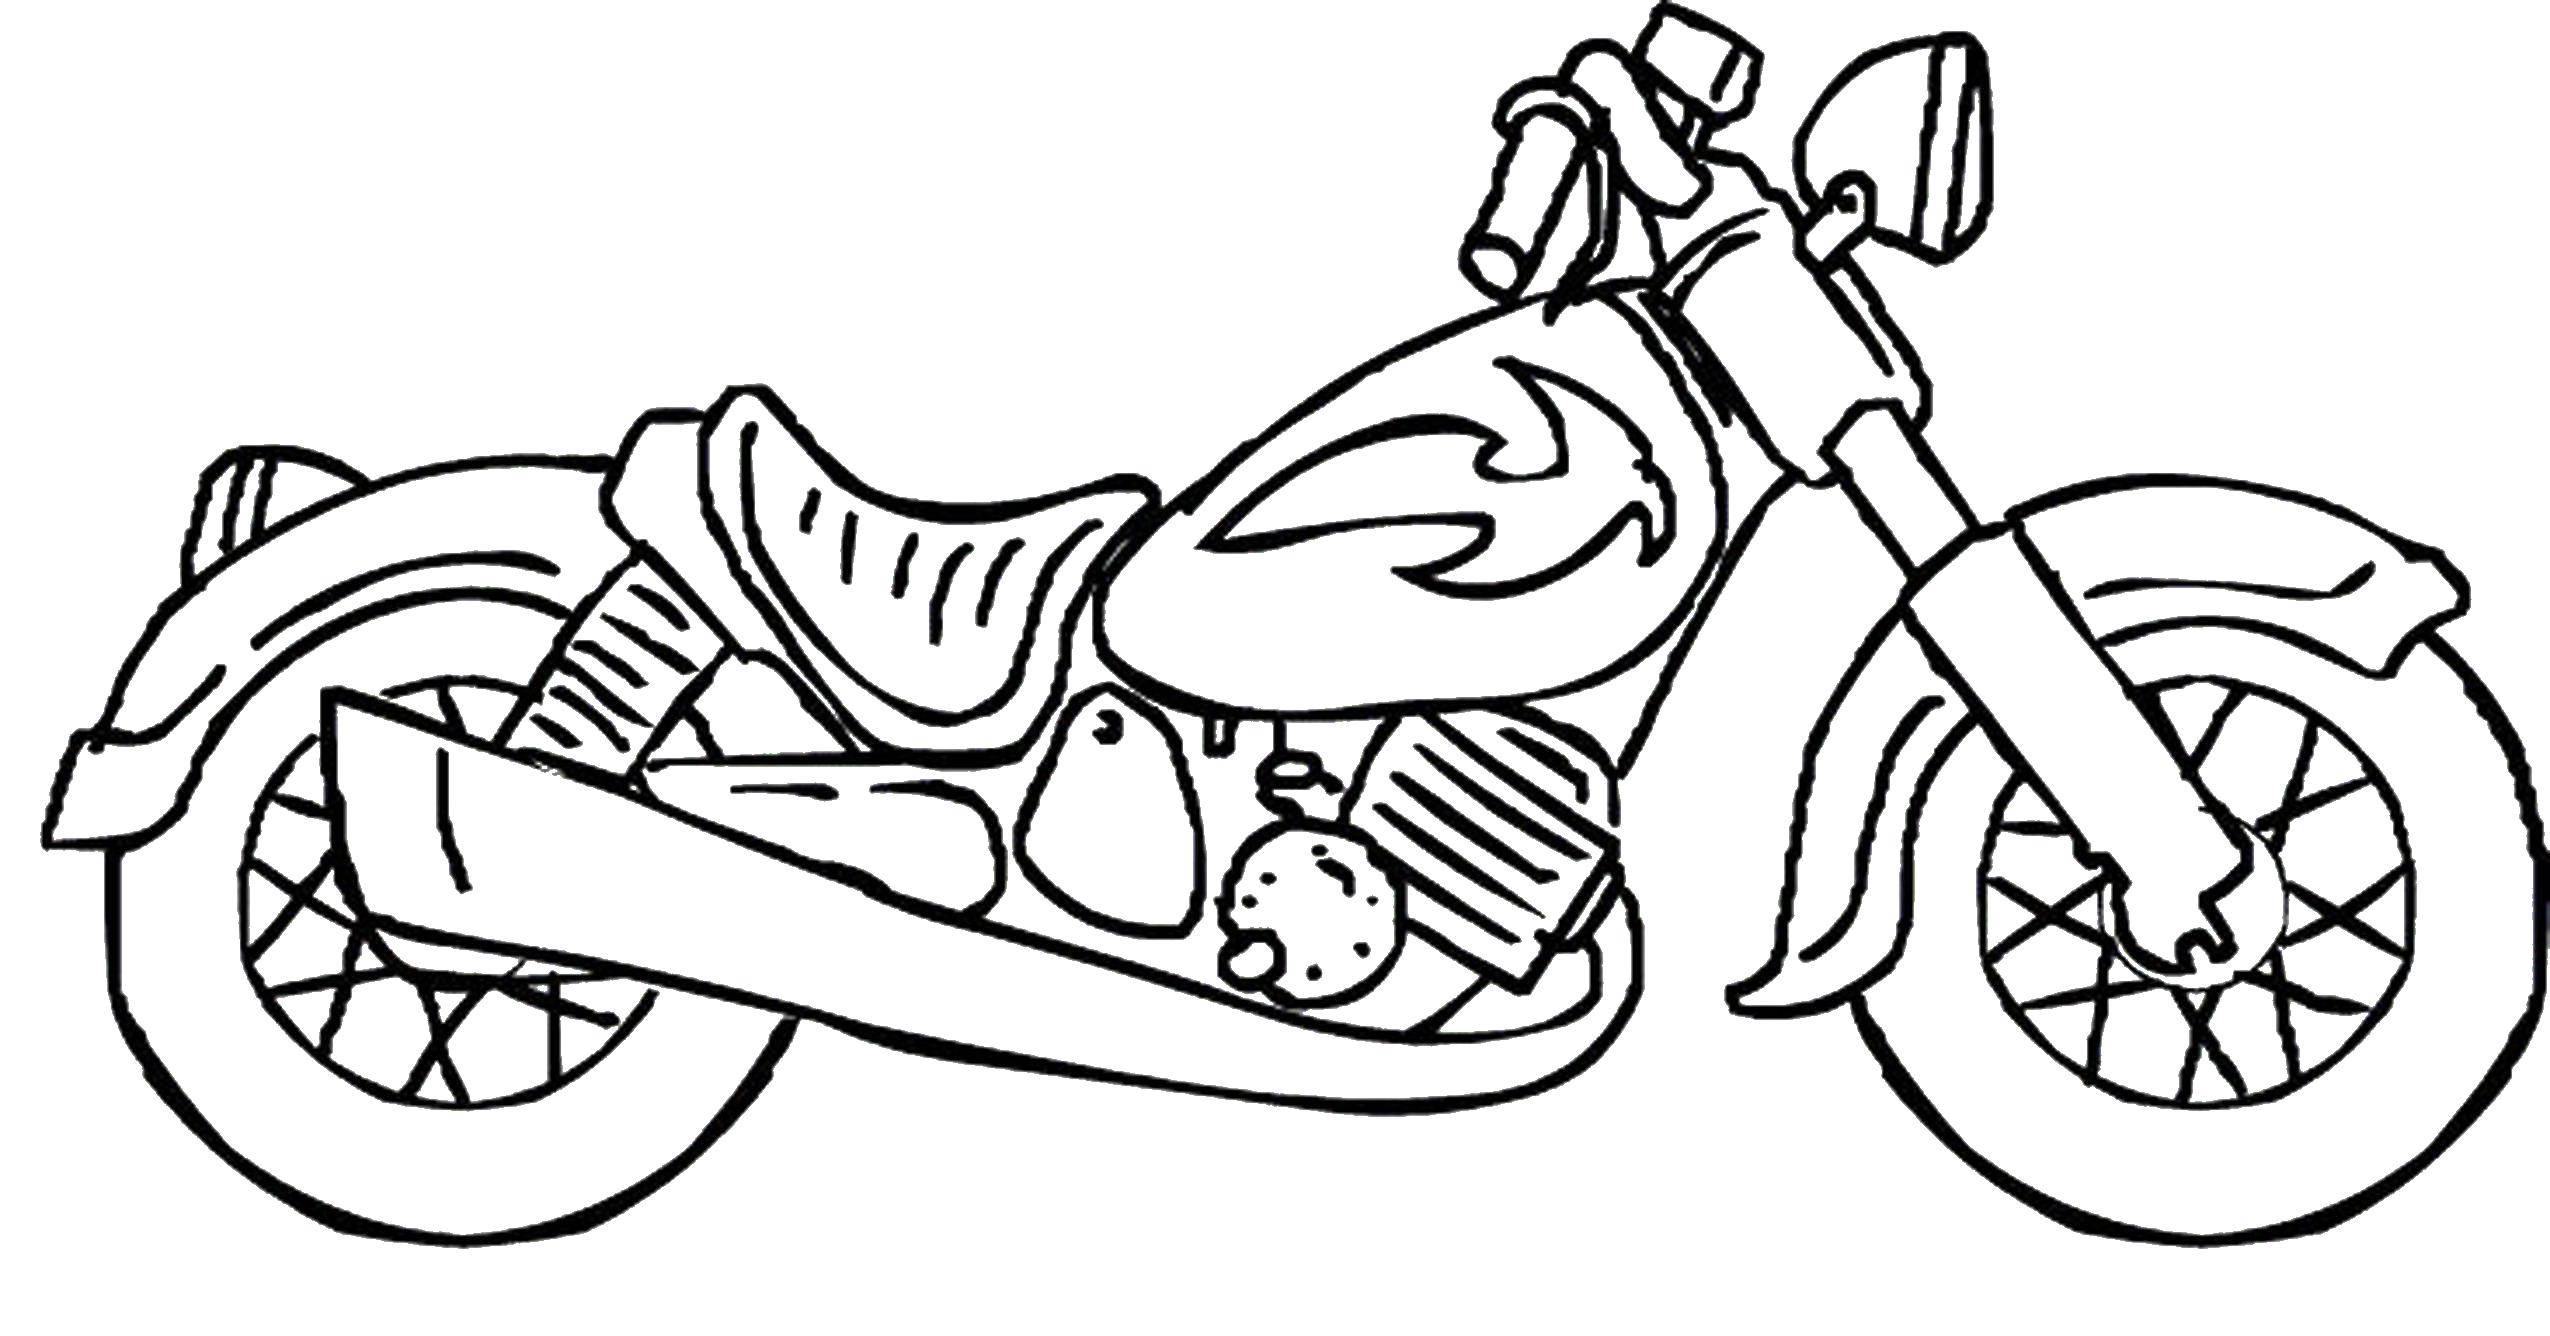 Coloring Motorcycle. Category For boys . Tags:  for boys, motorcycle.